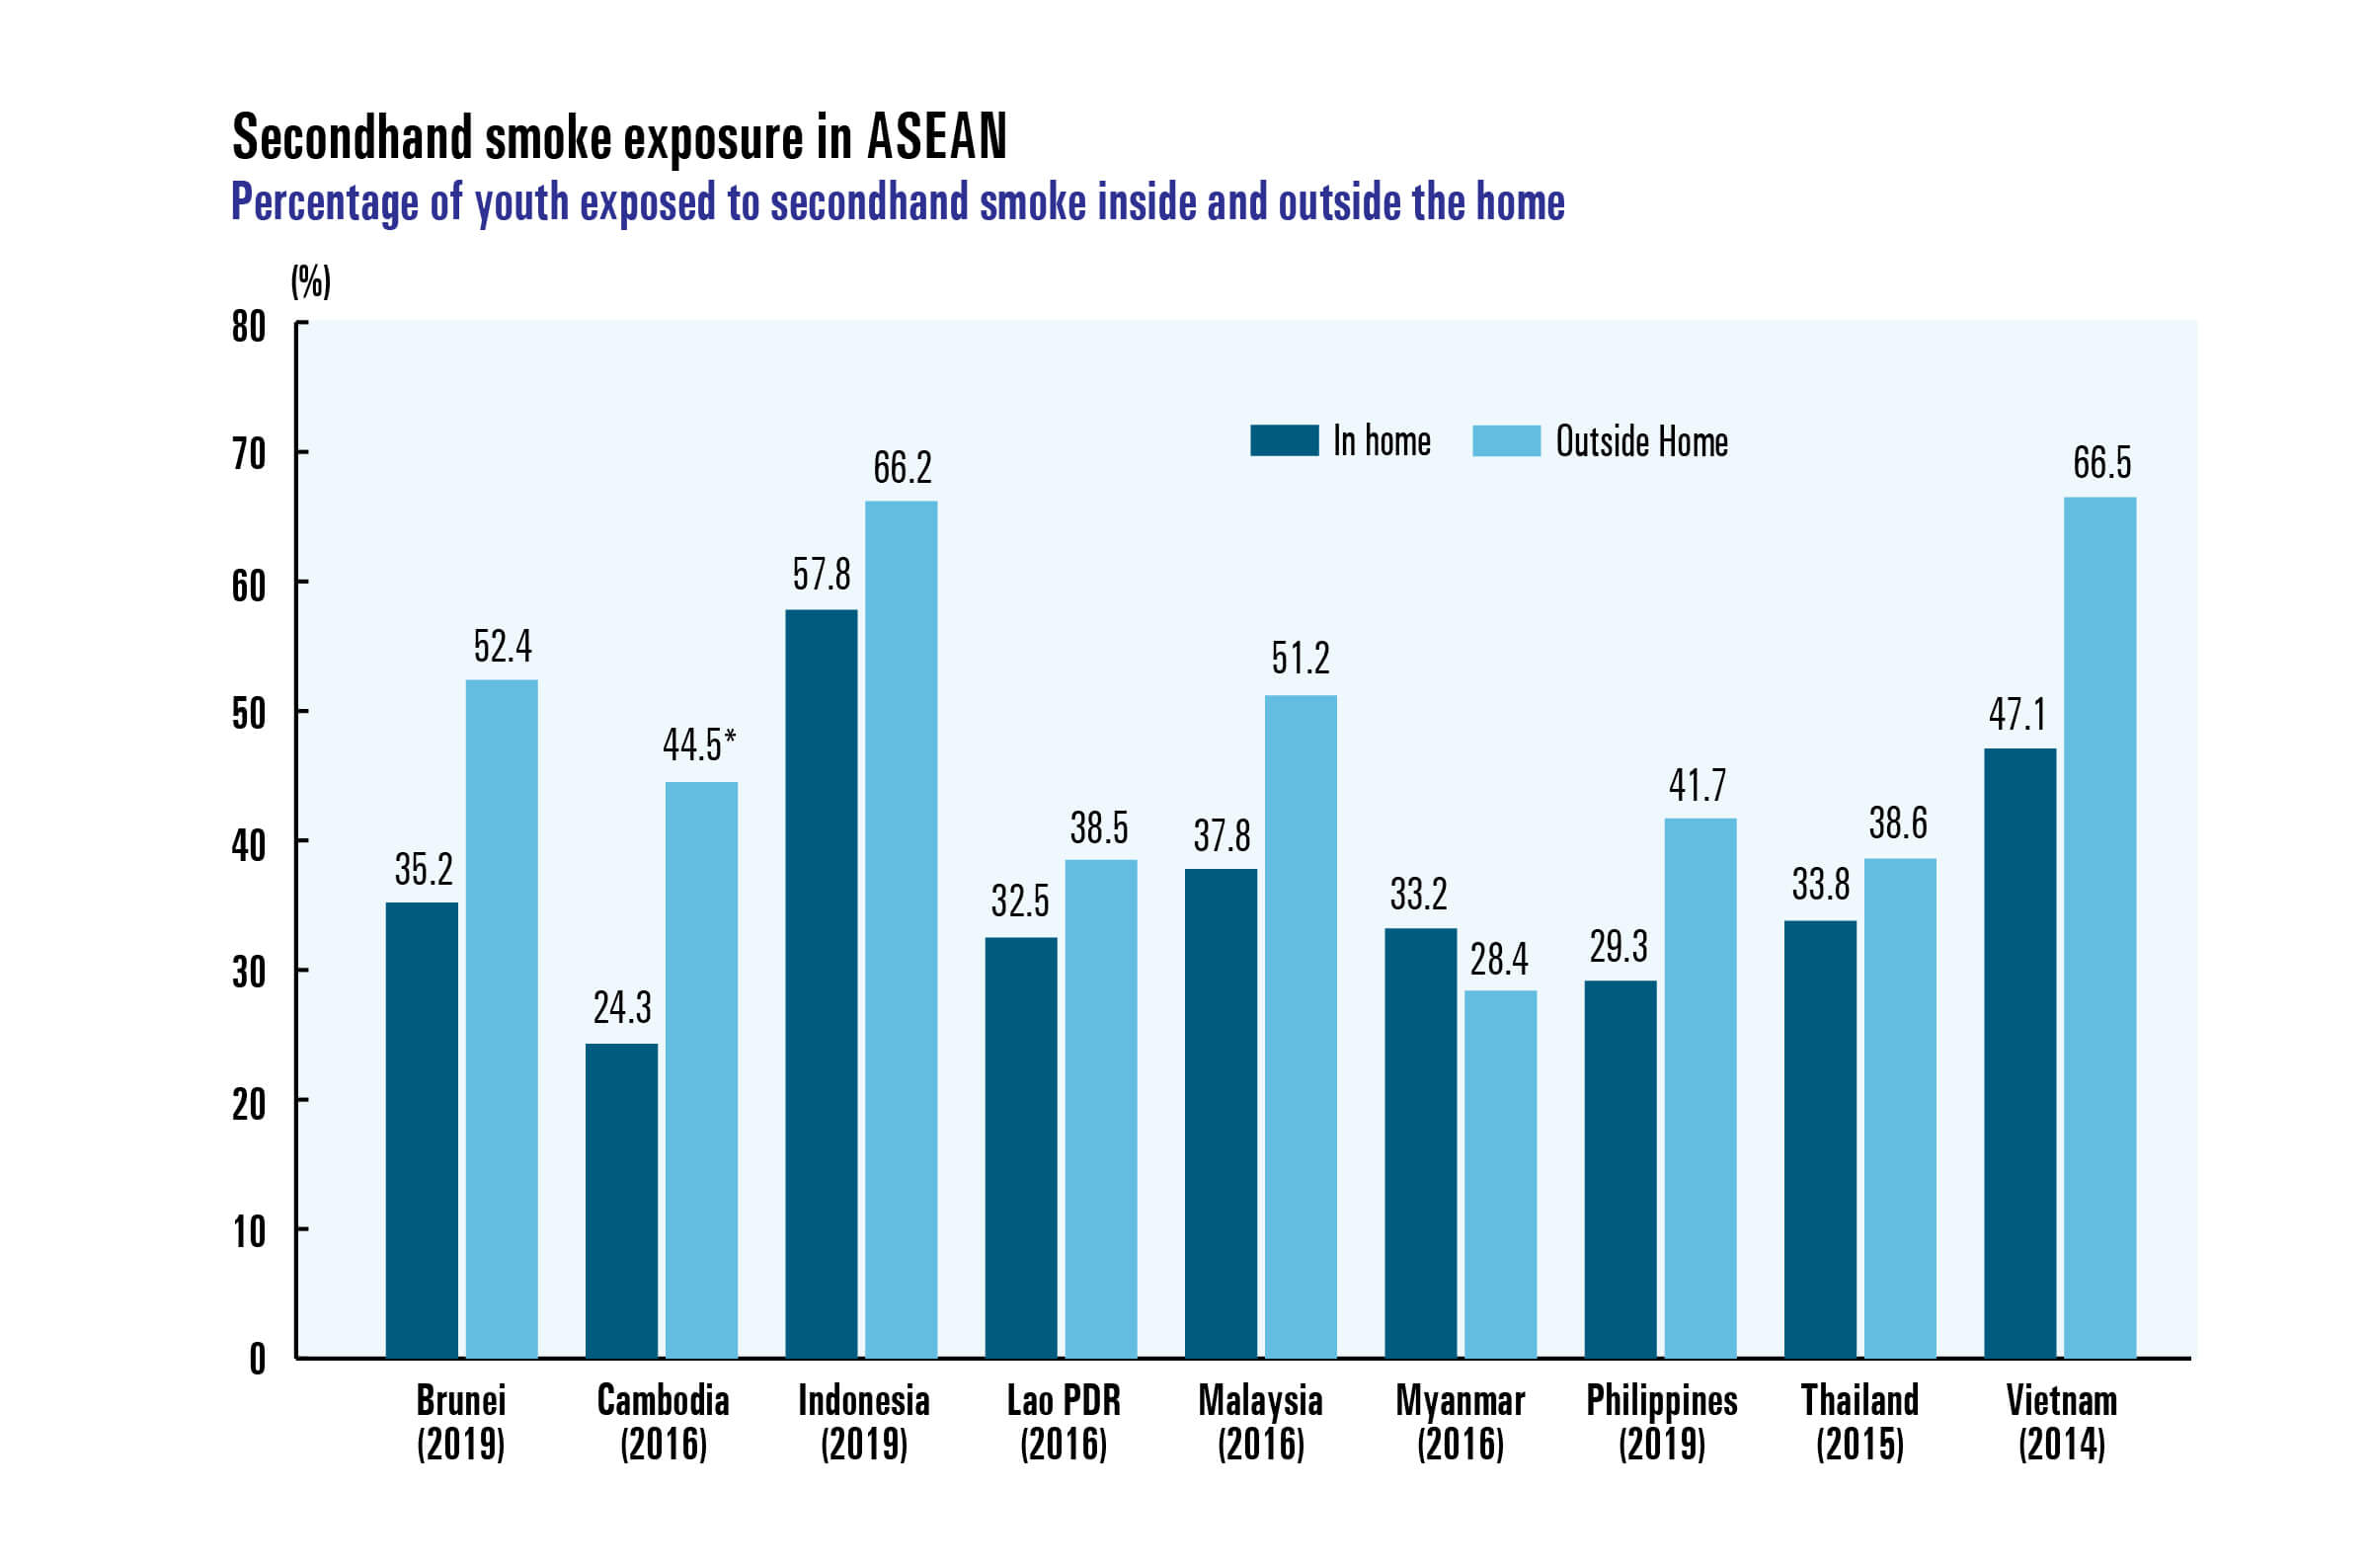 Percentage of youth exposed to secondhand smoke inside and outside the home